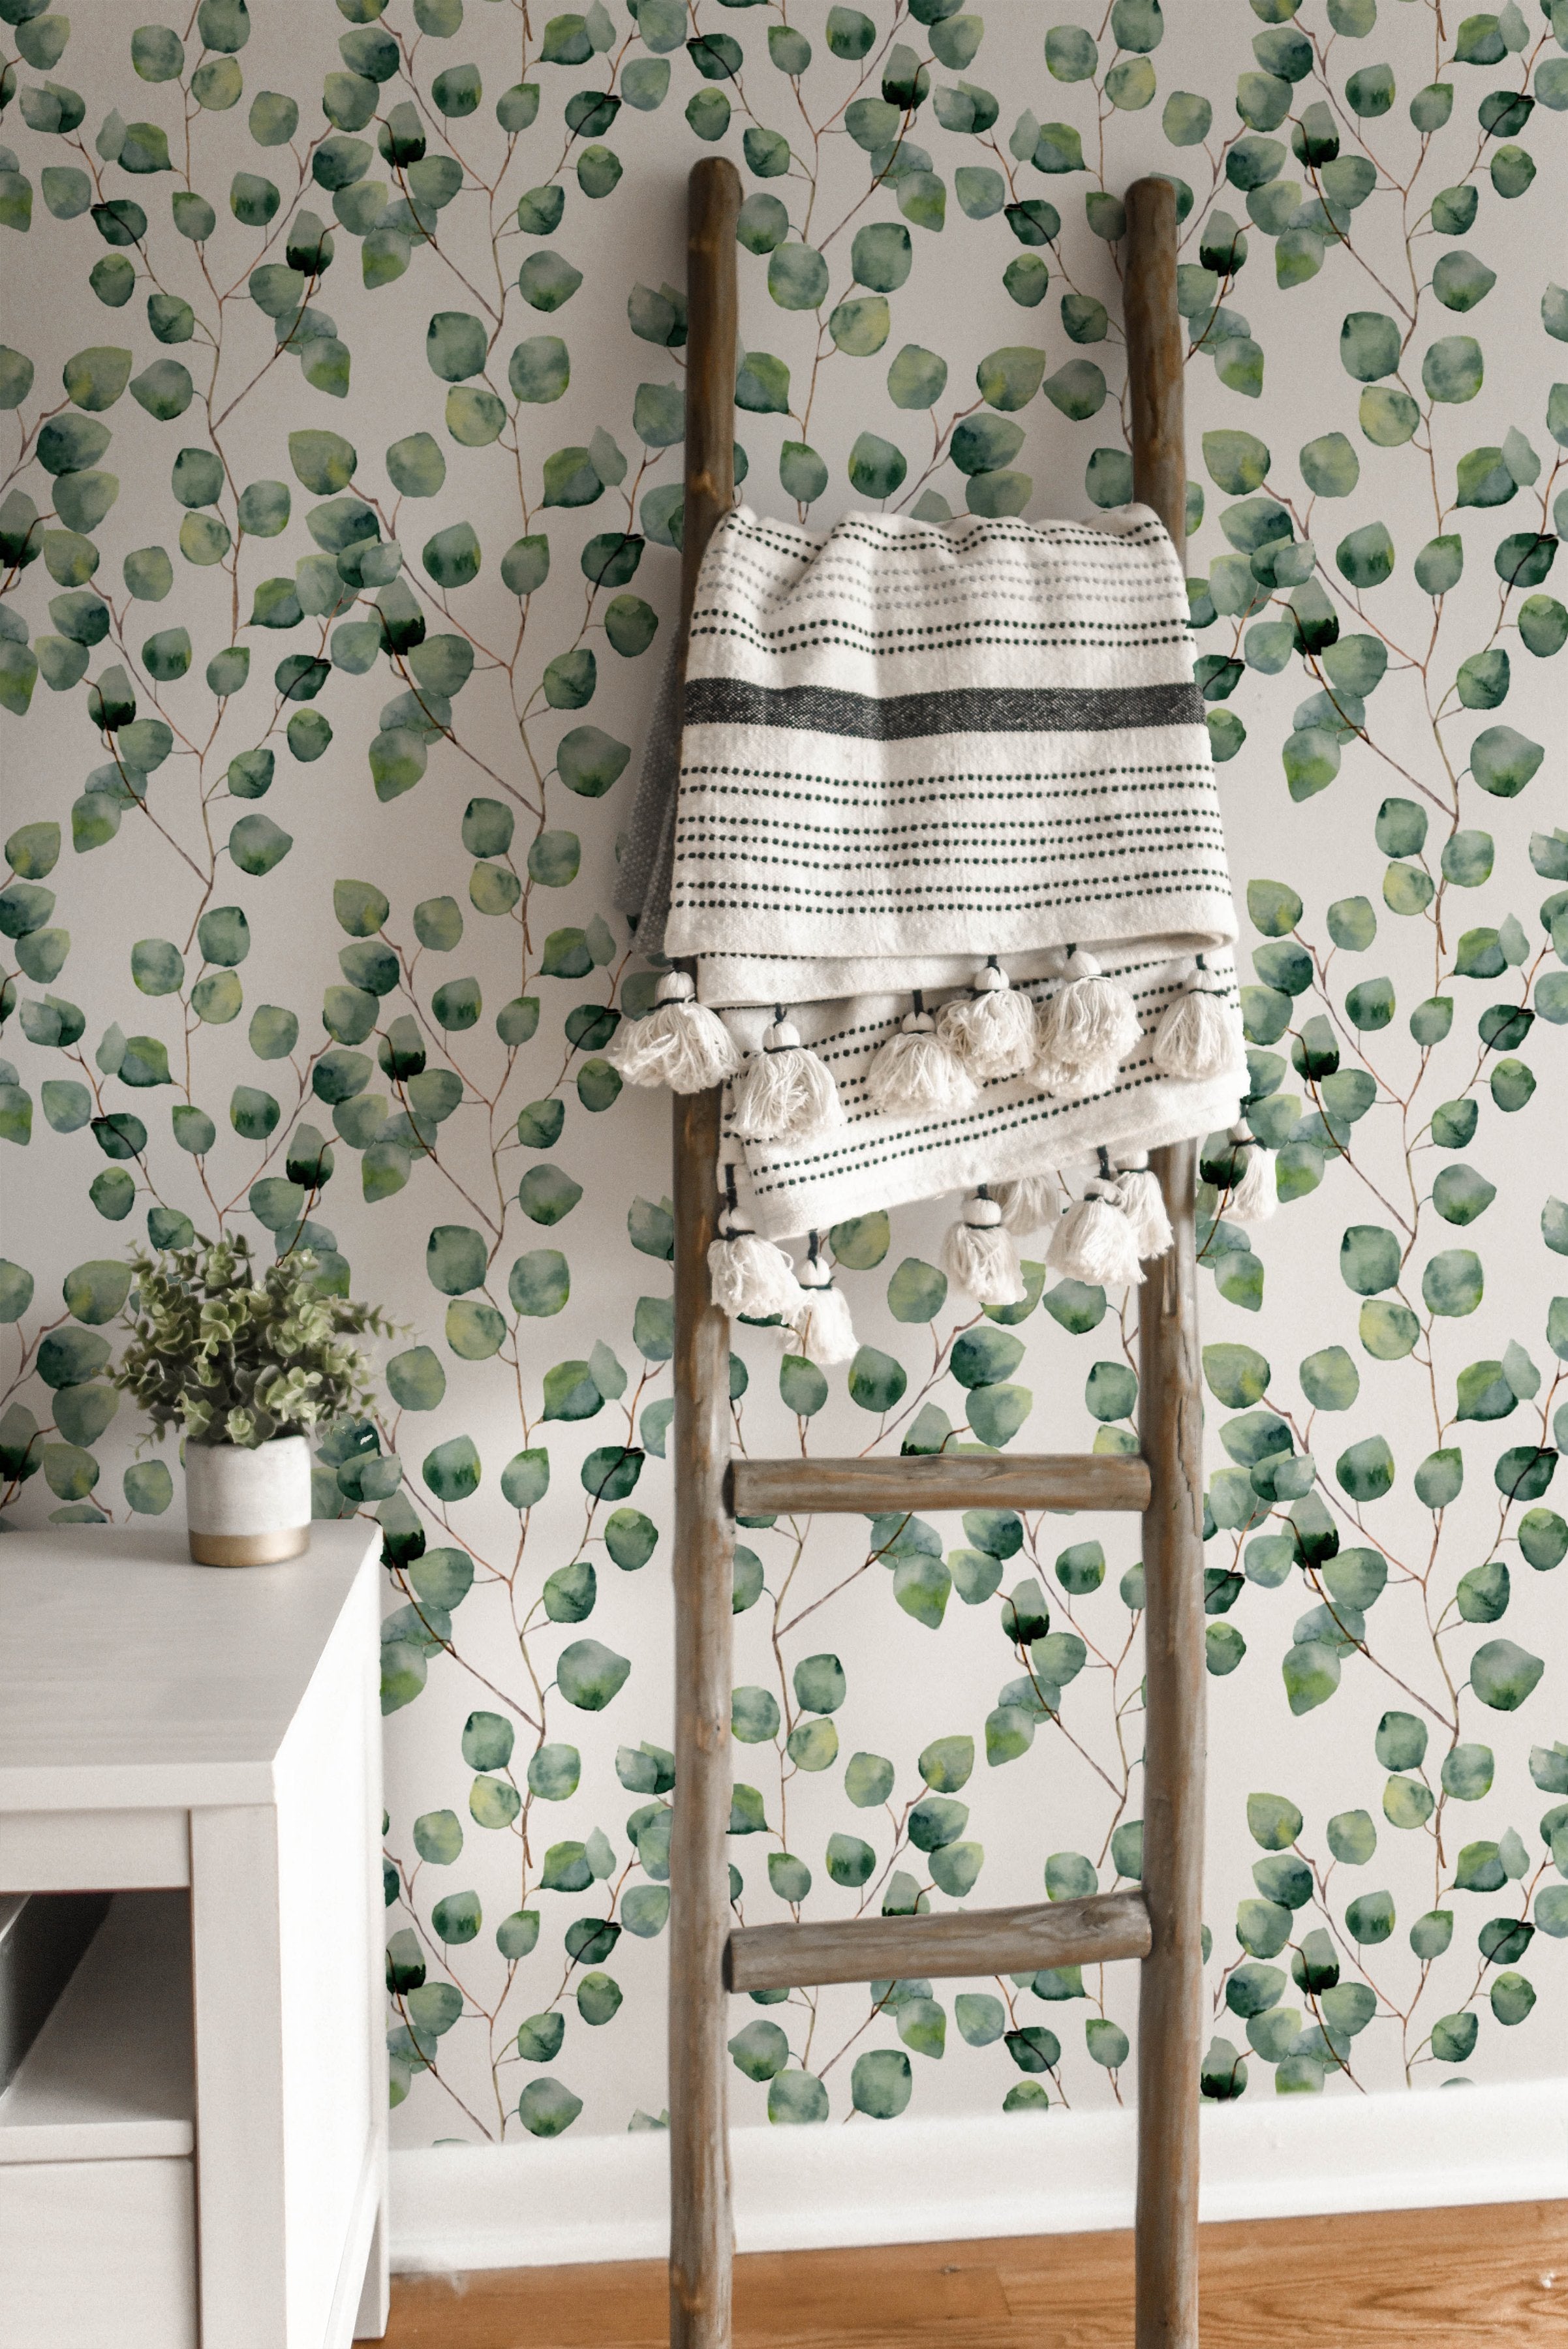 A rustic wooden ladder draped with a patterned throw, standing against the Watercolour Floral Wallpaper - Eucalyptus, complementing the wallpaper's organic feel with natural textures.